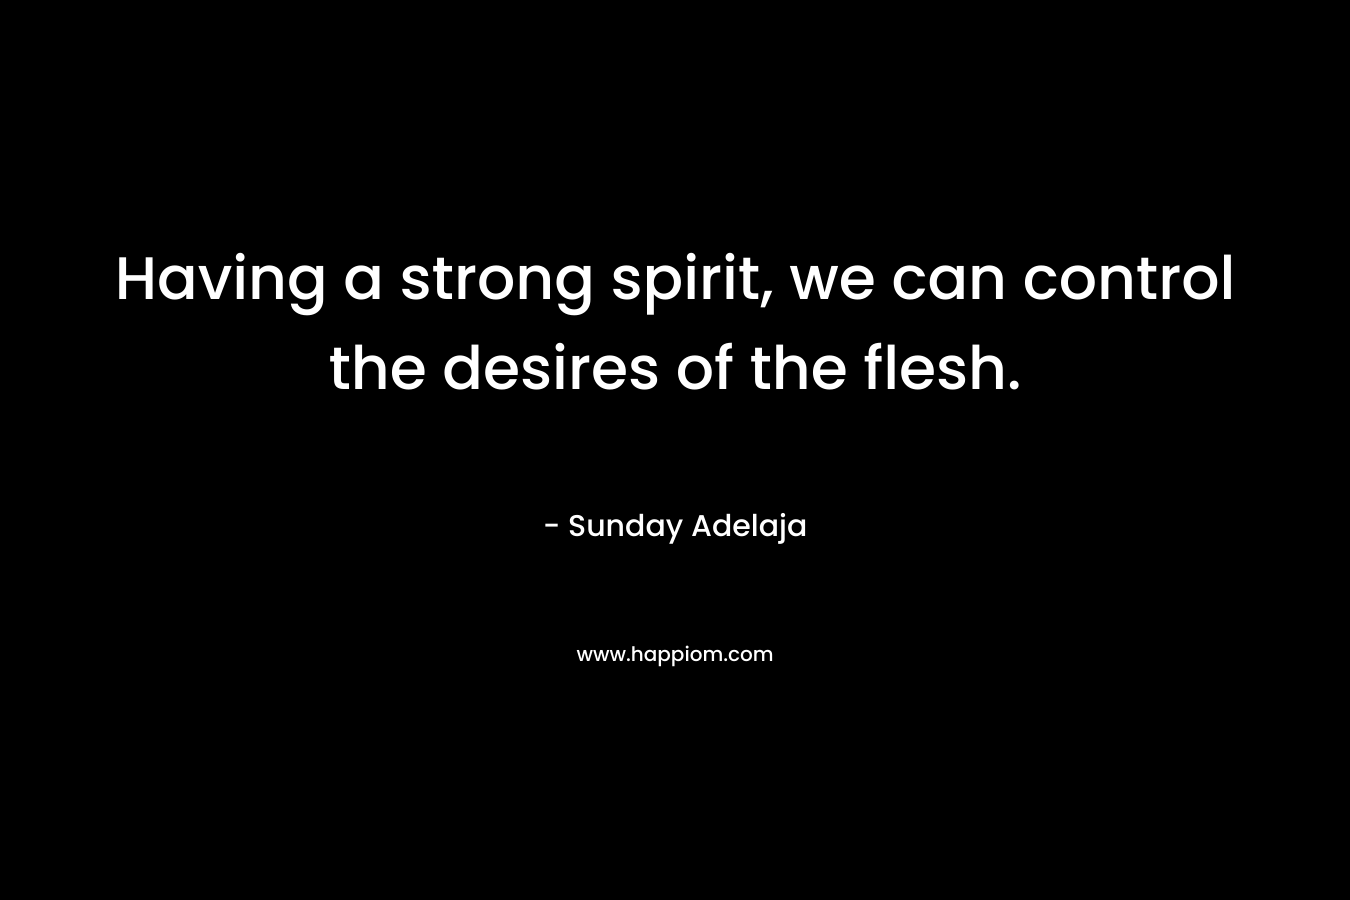 Having a strong spirit, we can control the desires of the flesh.